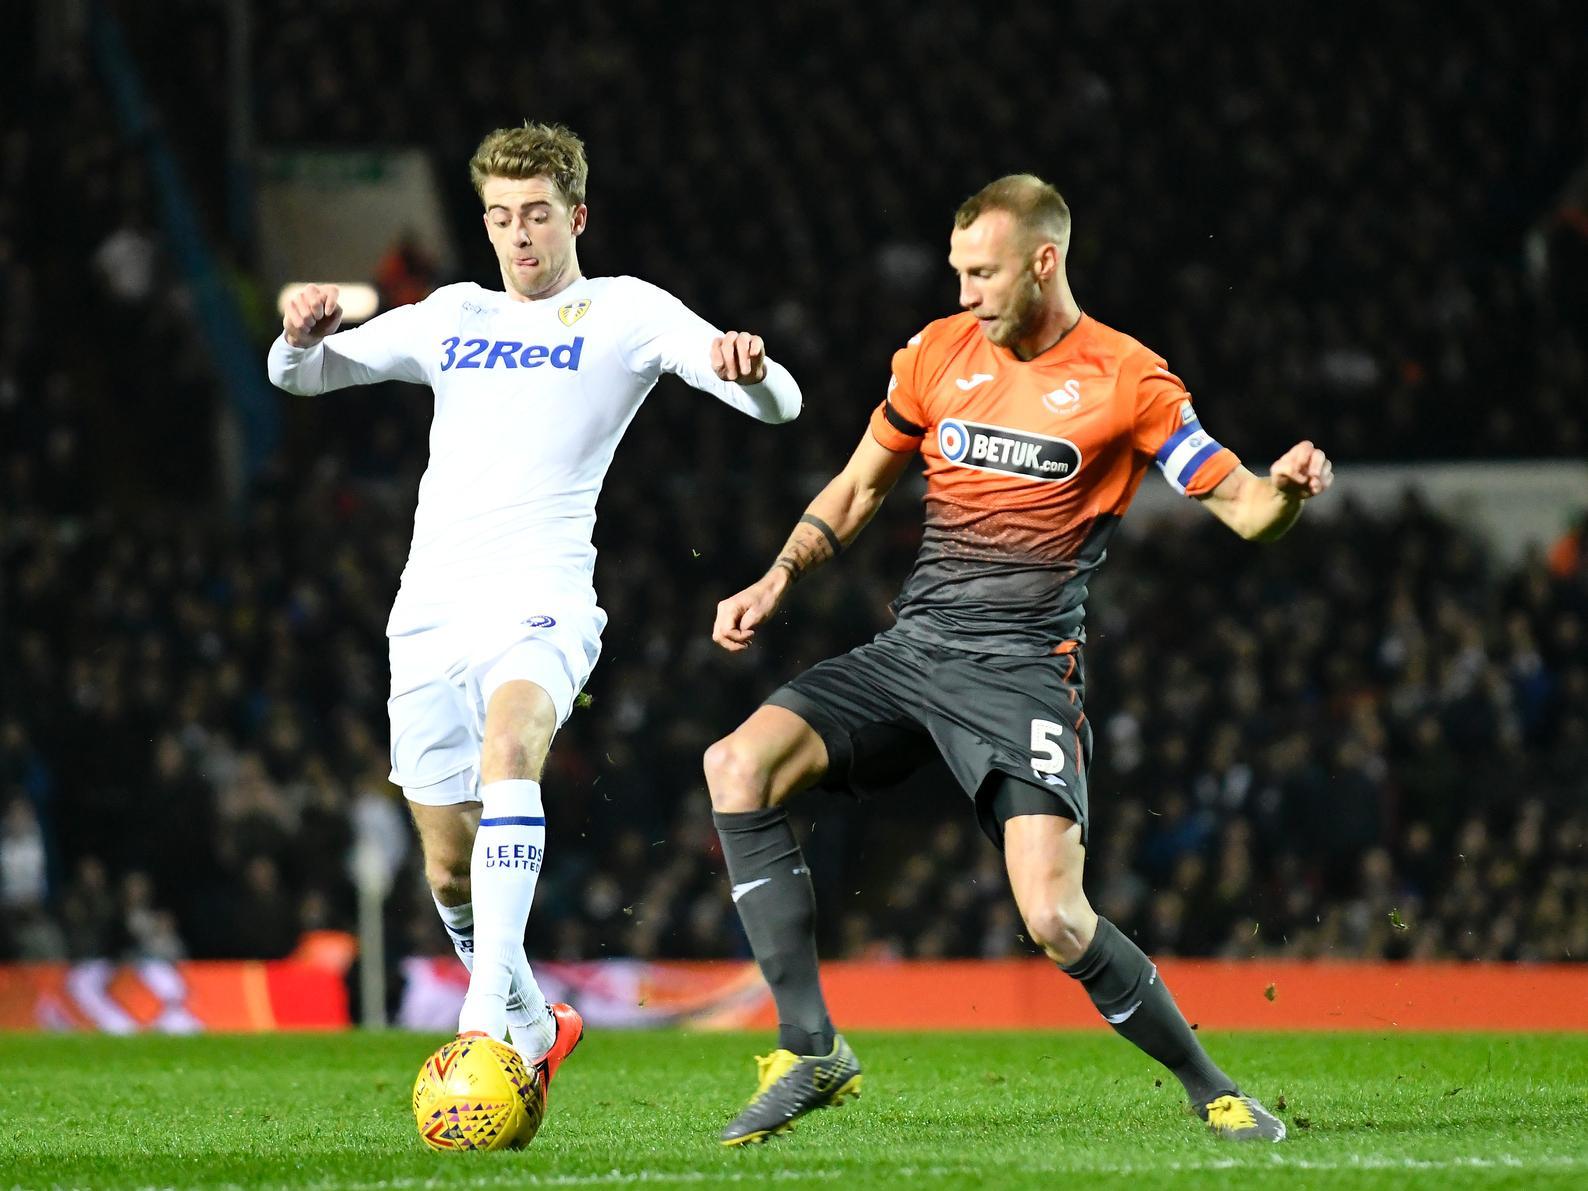 Mike van der Hoorn (Swansea City) - Lots of dribbling out from the back and kept his men calm when their backs were against the wall at Elland Road. Stole the win, too.